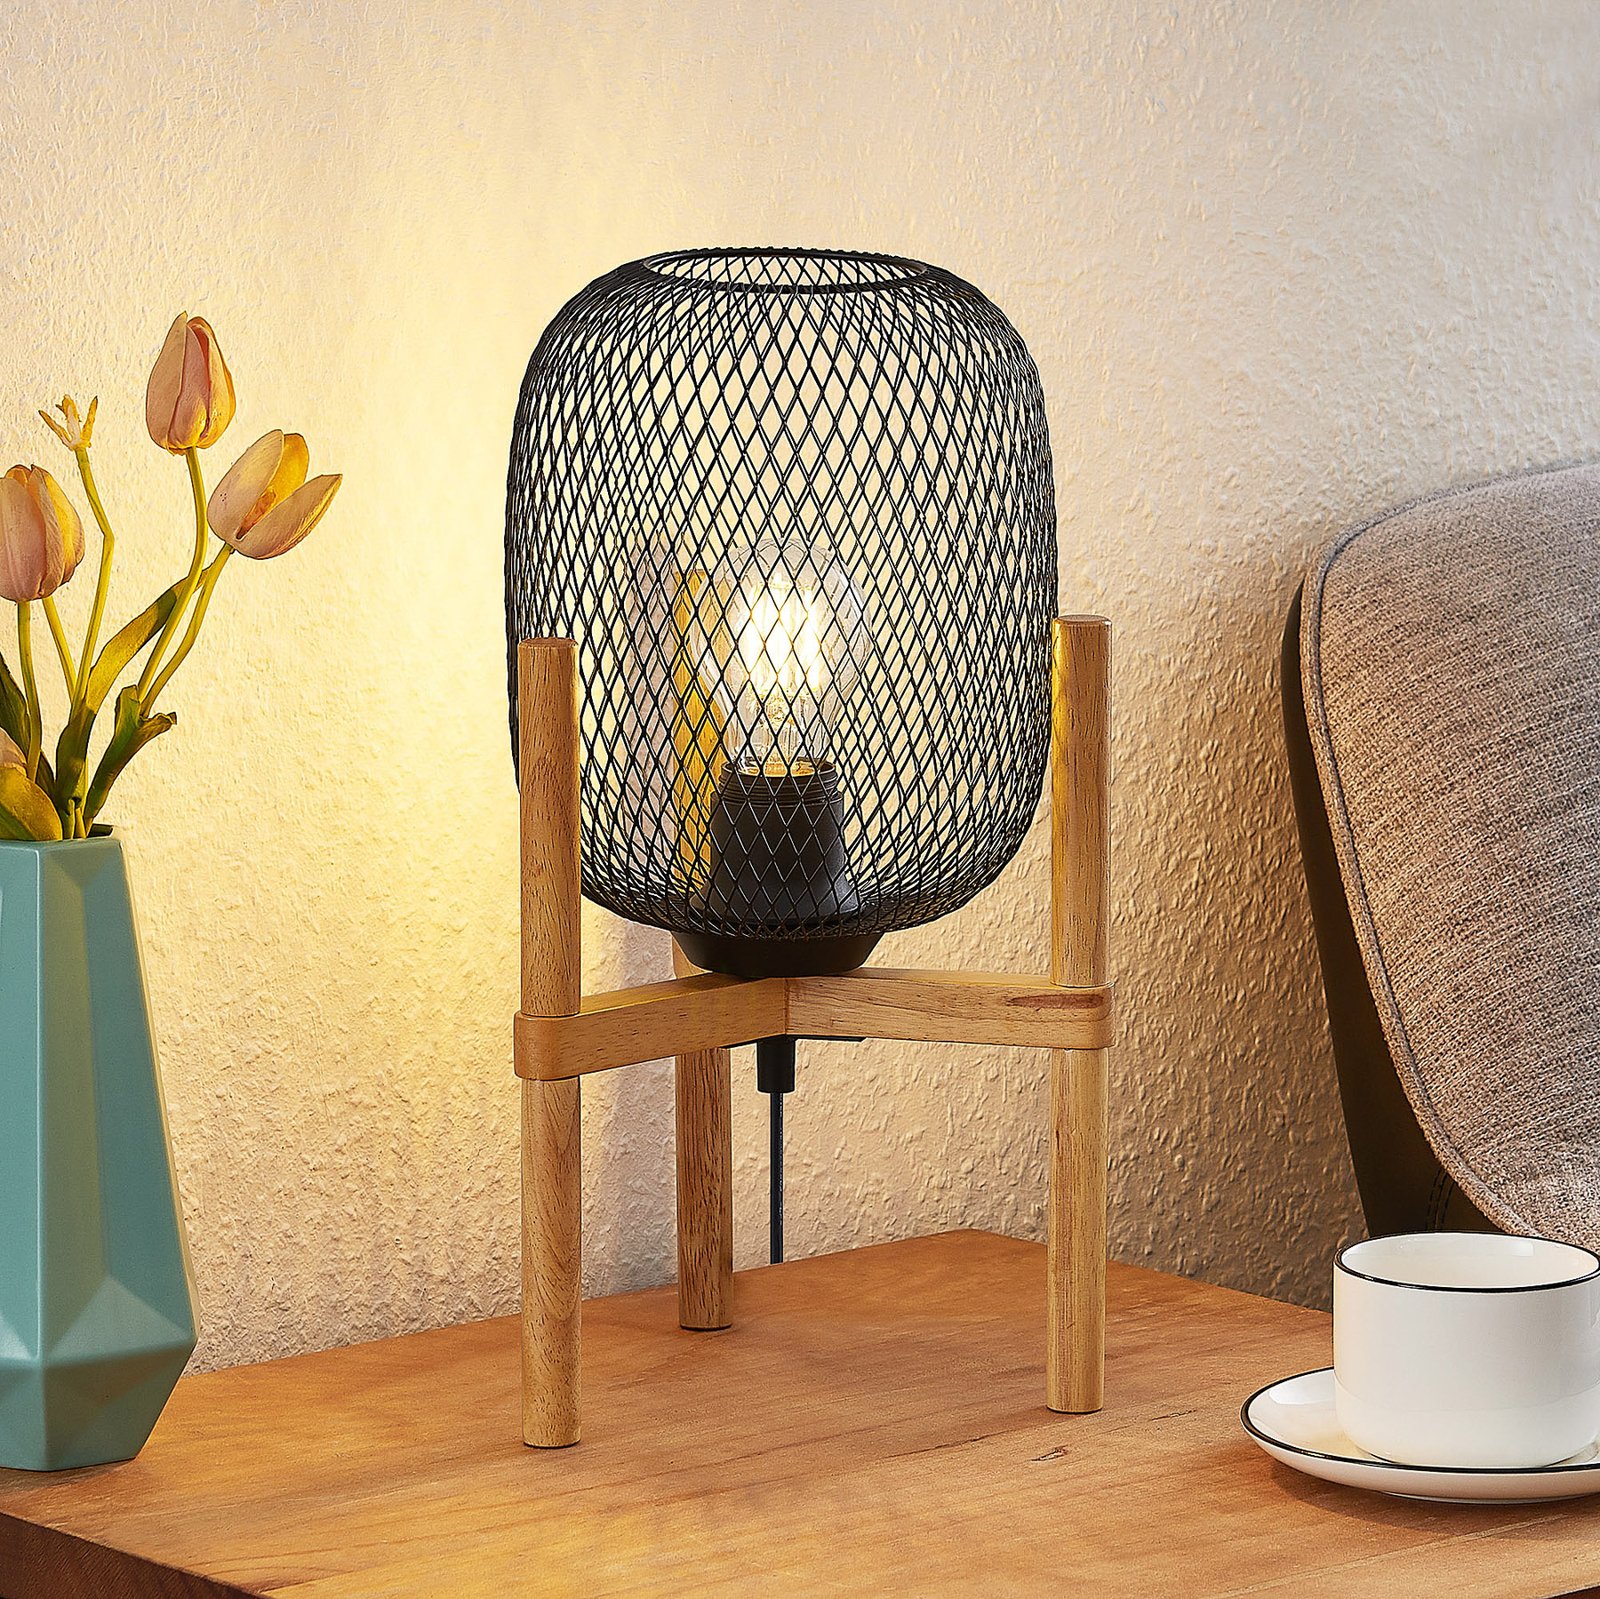 Lindby Djuna cage table lamp with wooden frame